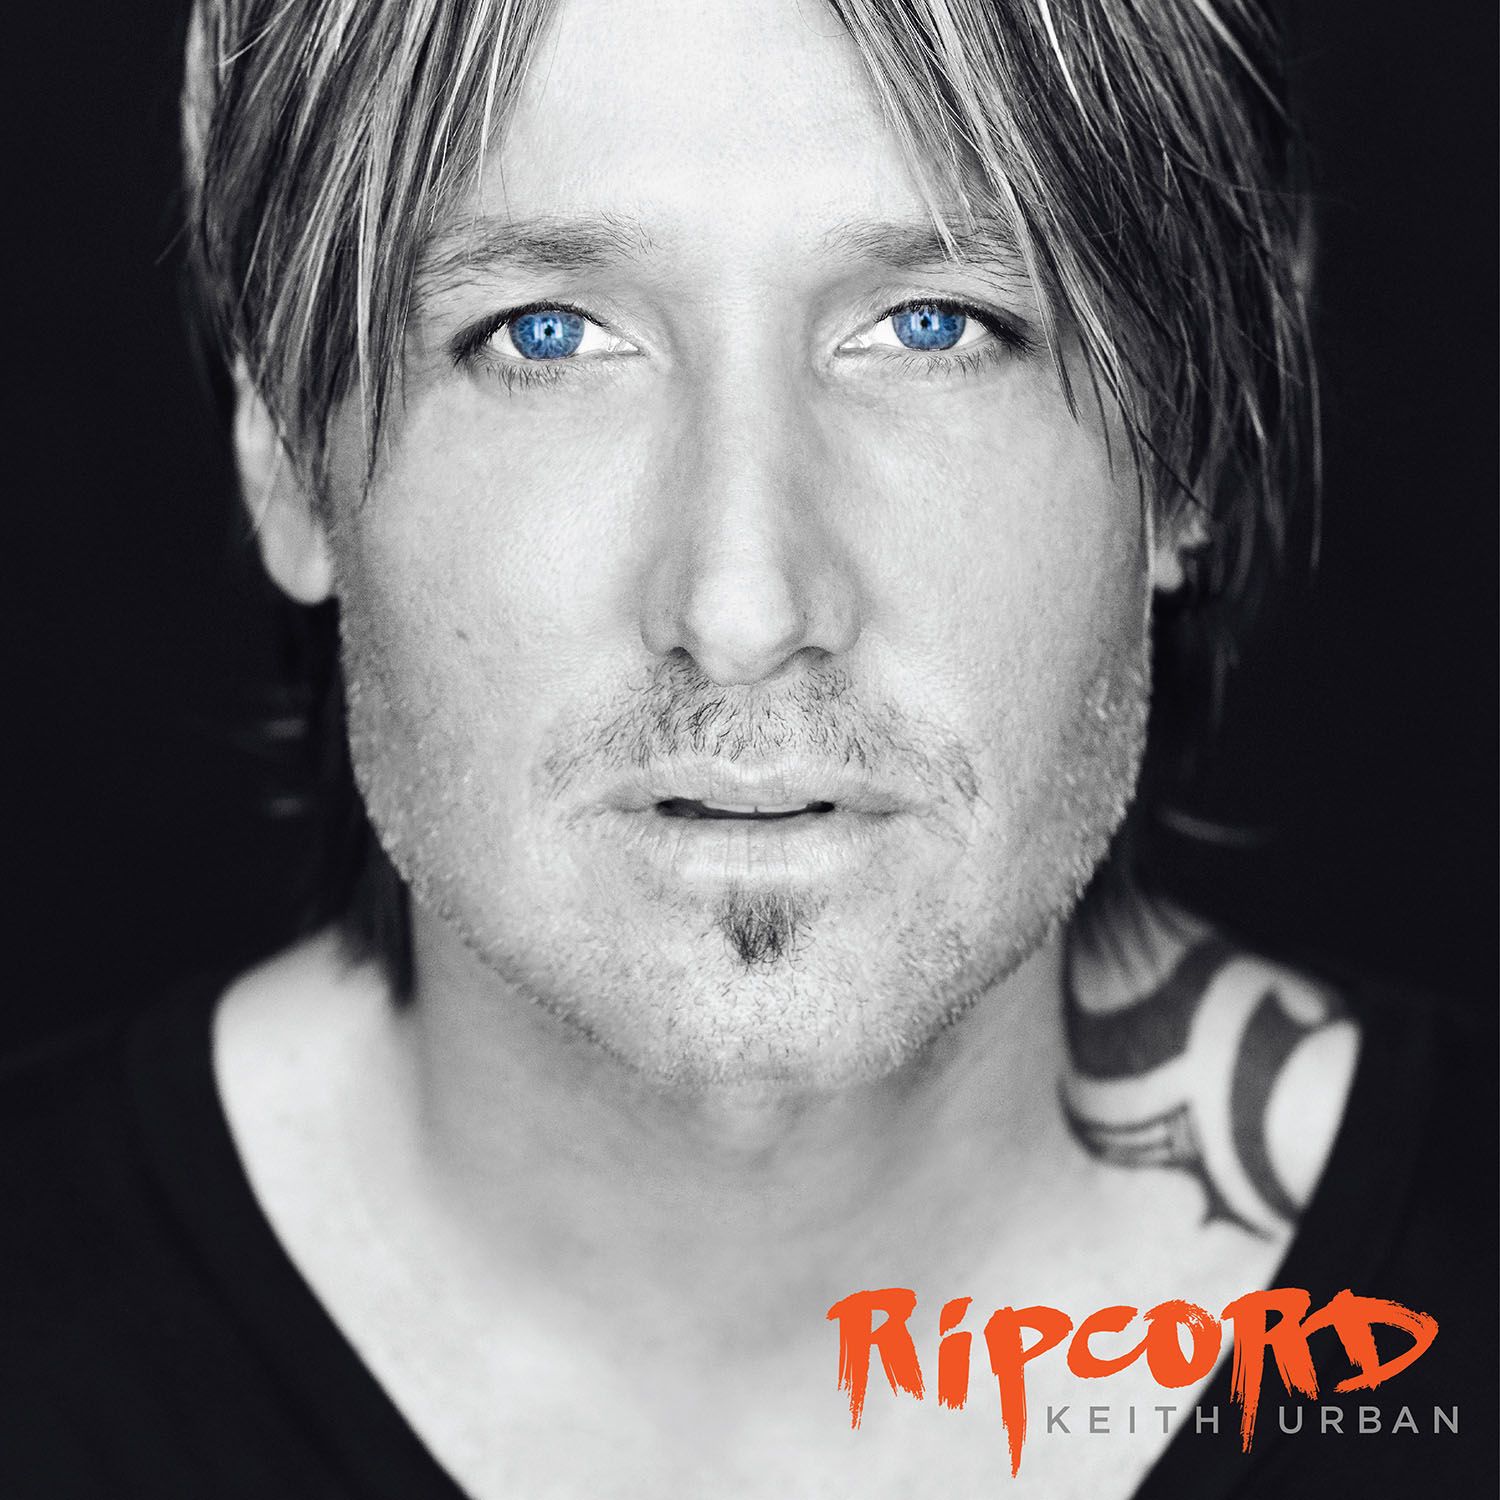 KEITH URBAN CELEBRATES NINTH CONSECUTIVE PLATINUM ALBUM WITH RIPCORD   #8 ALL-TIME AMONGST COUNTRY ARTISTS WITH CONSECUTIVE PLATINUM RELEASES